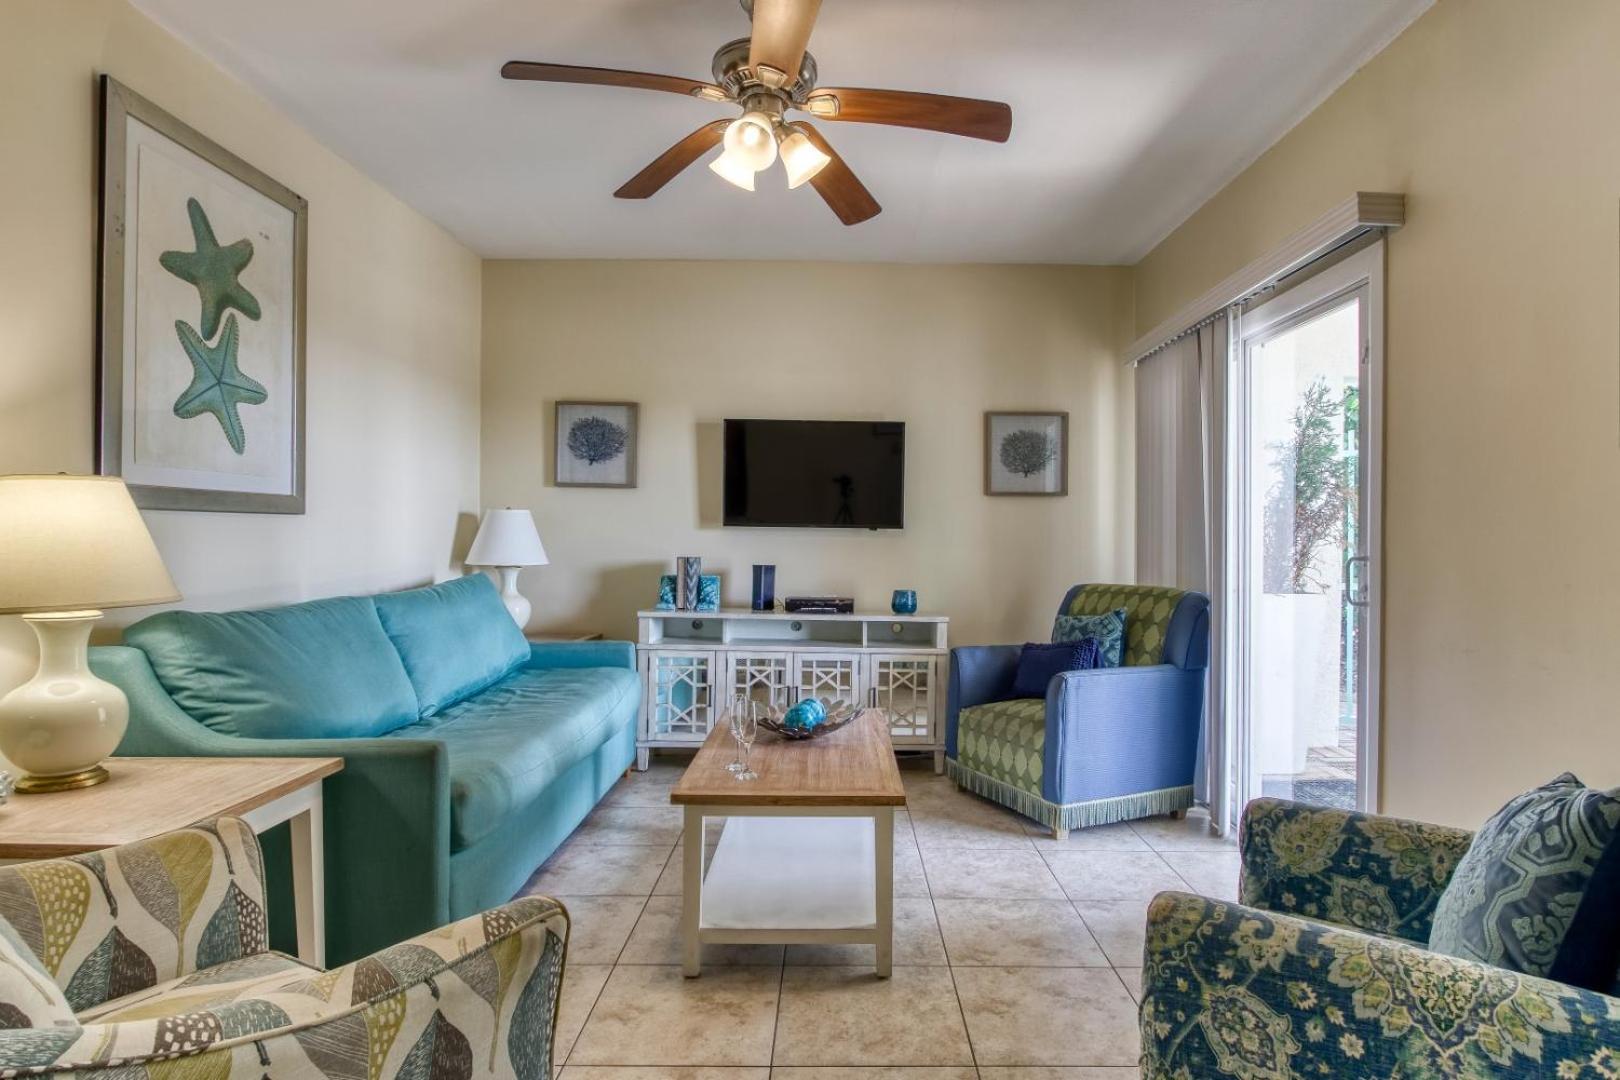 The New Hotel Collection Beachfront Clearwater Beach Extérieur photo